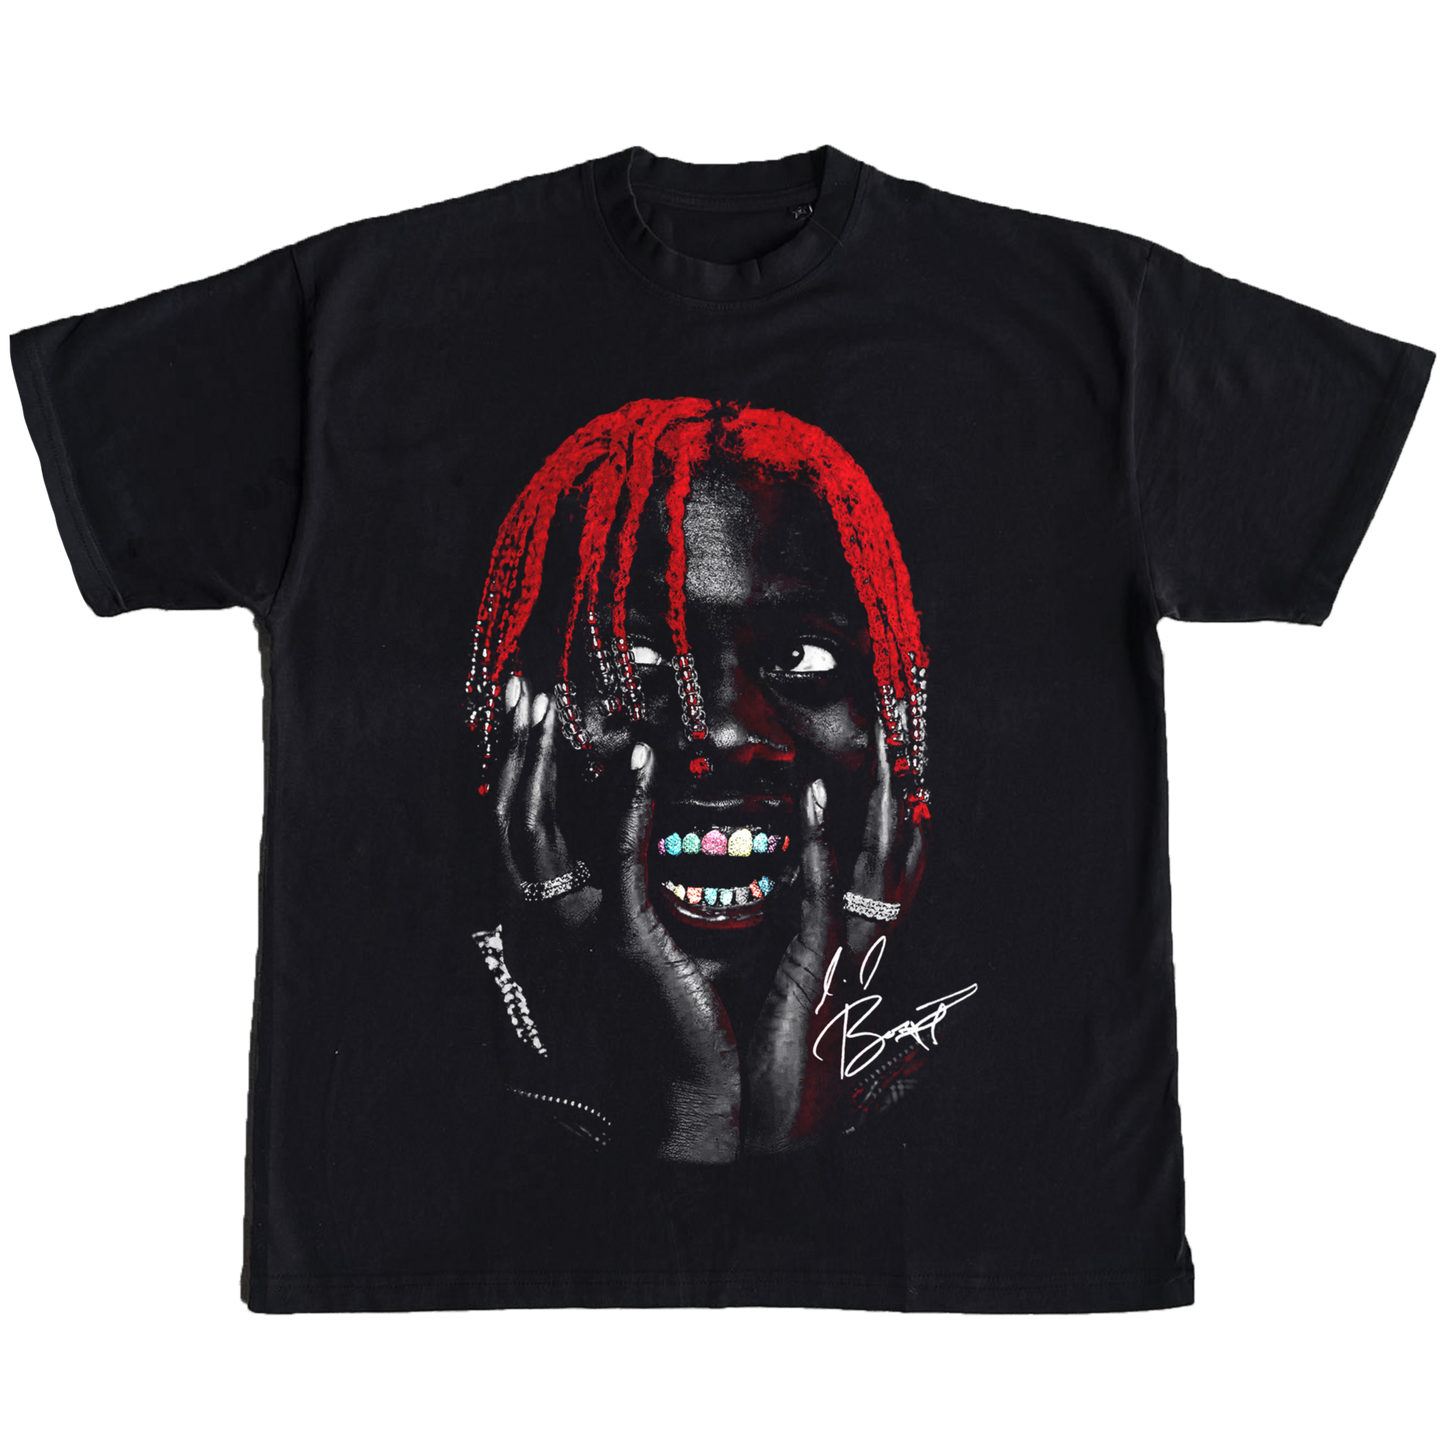 Lil Yachty Bootleg Rap Tee - A hip hop-inspired t-shirt featuring the rap genius of Lil Yachty